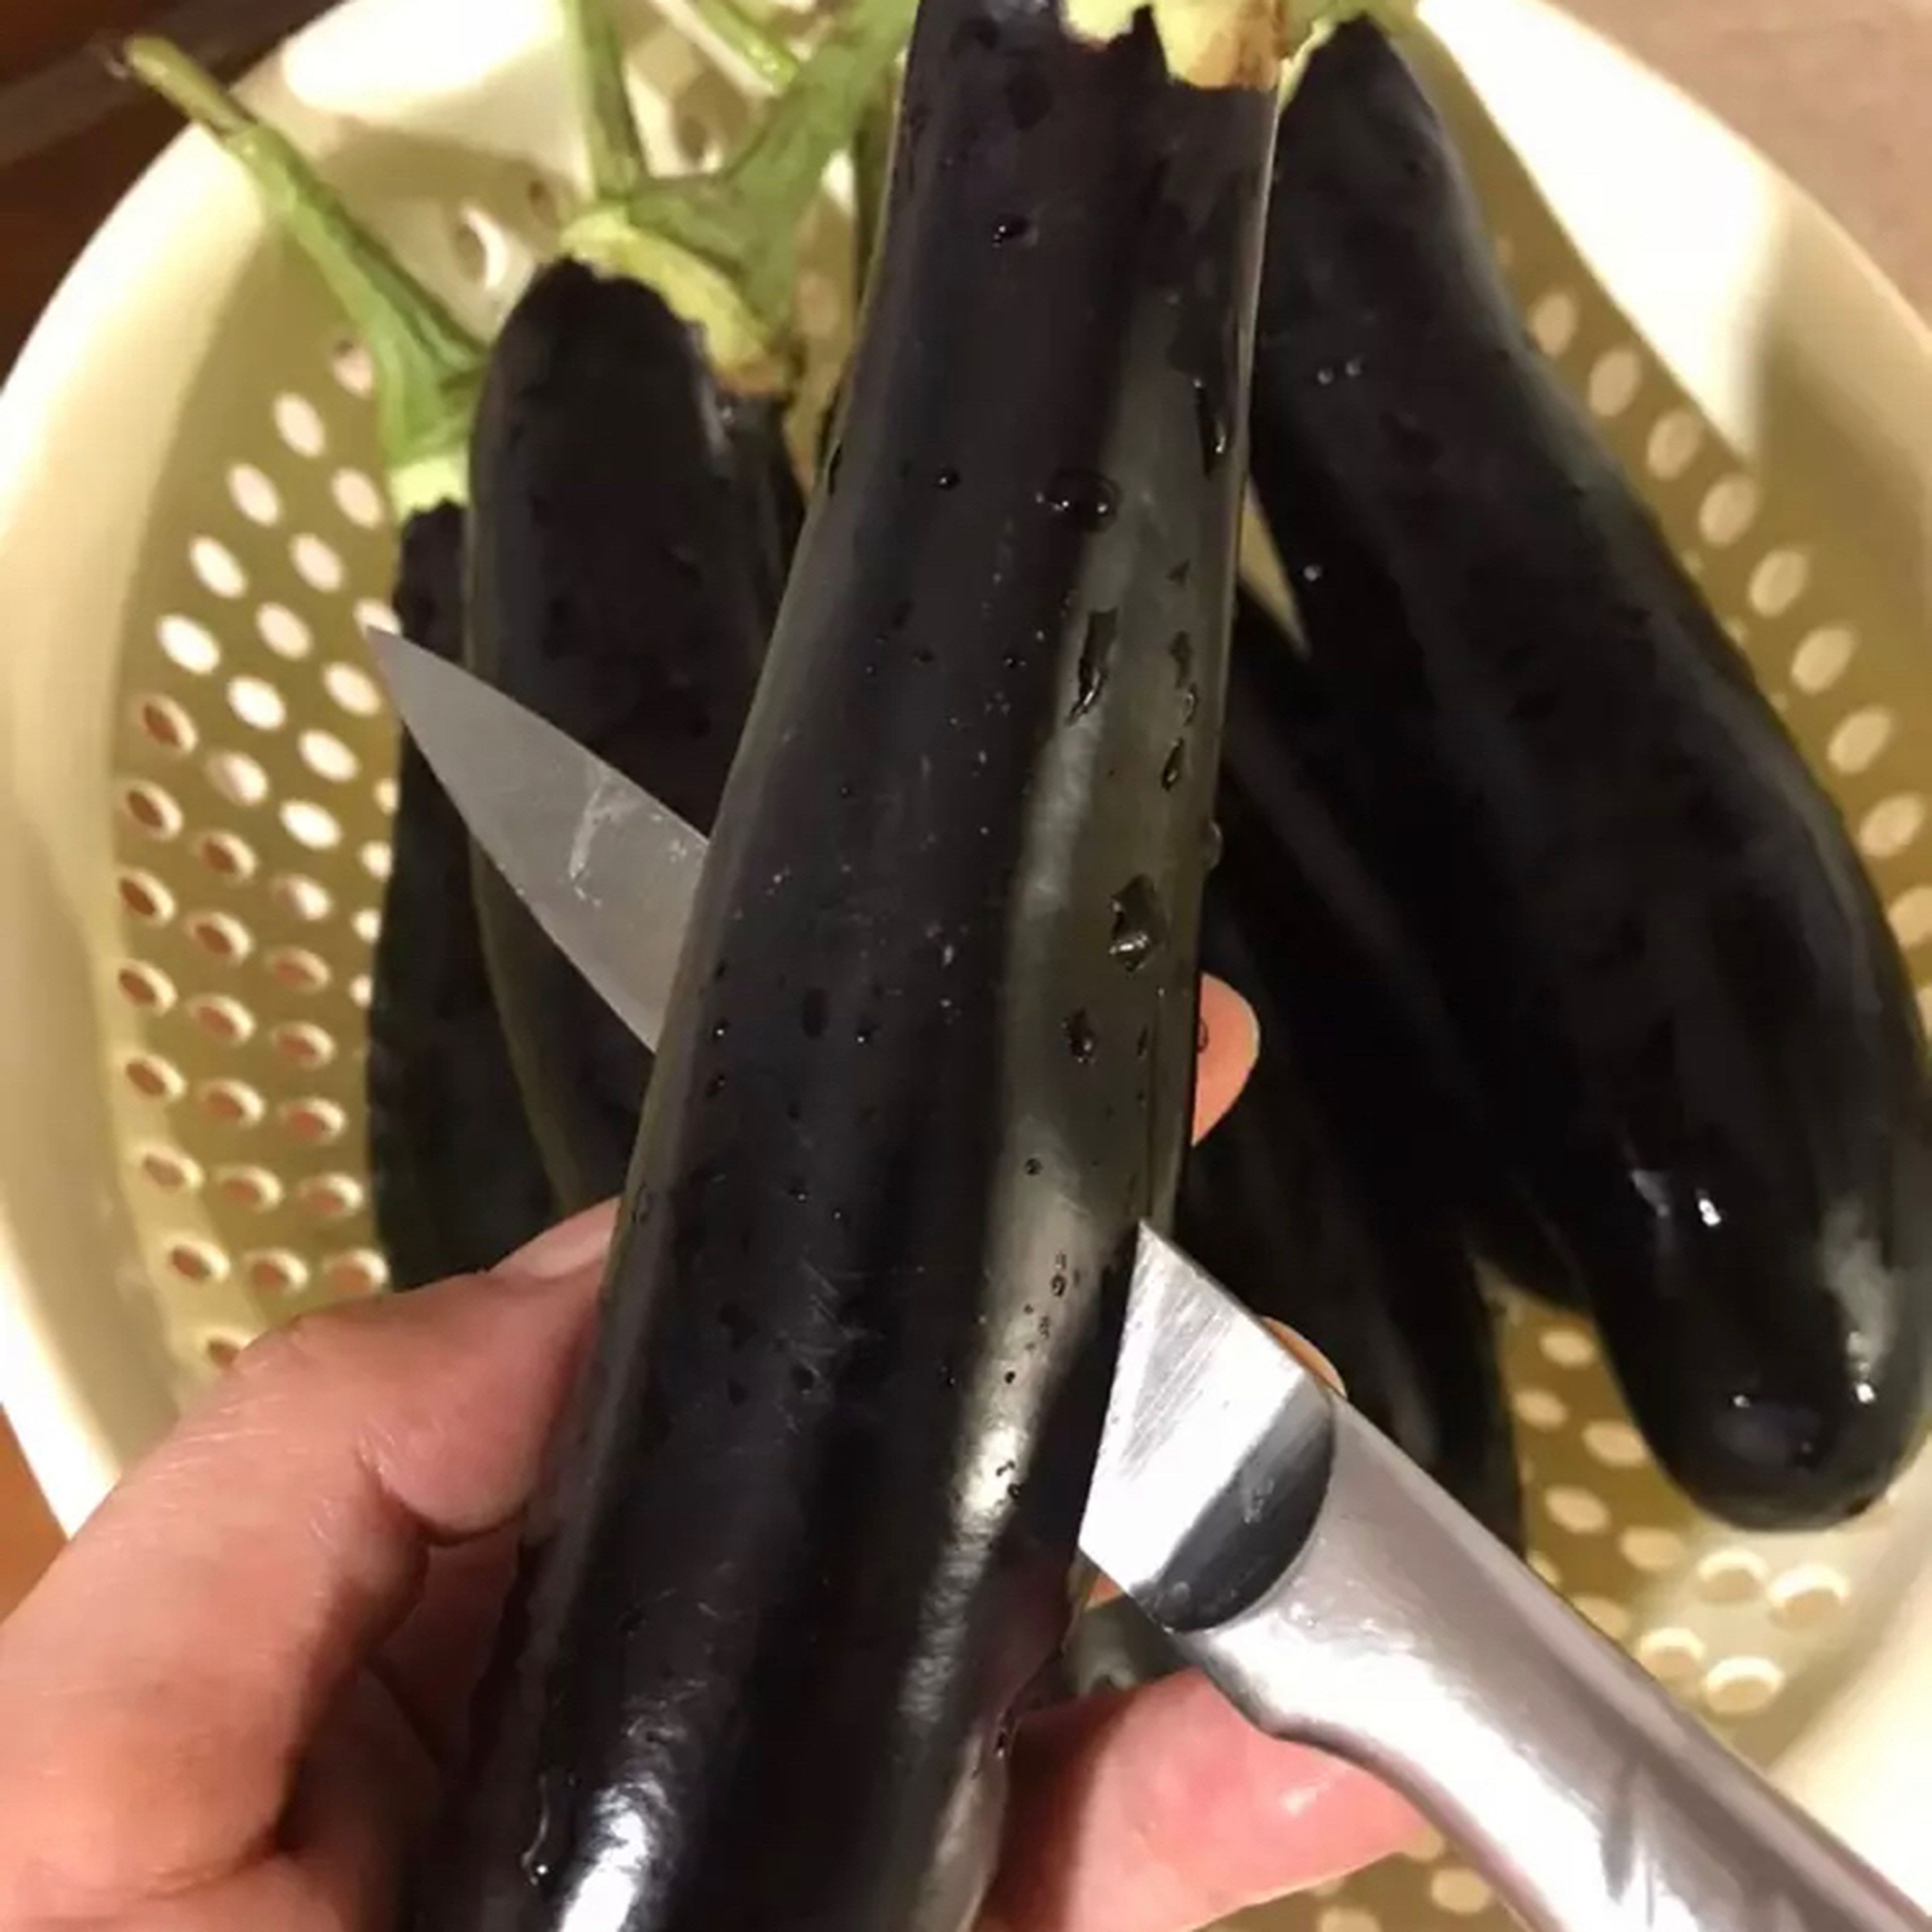 First of all, cut the eggplants a few times with the tip of a knife and grill them in the oven or on a cast iron pan.